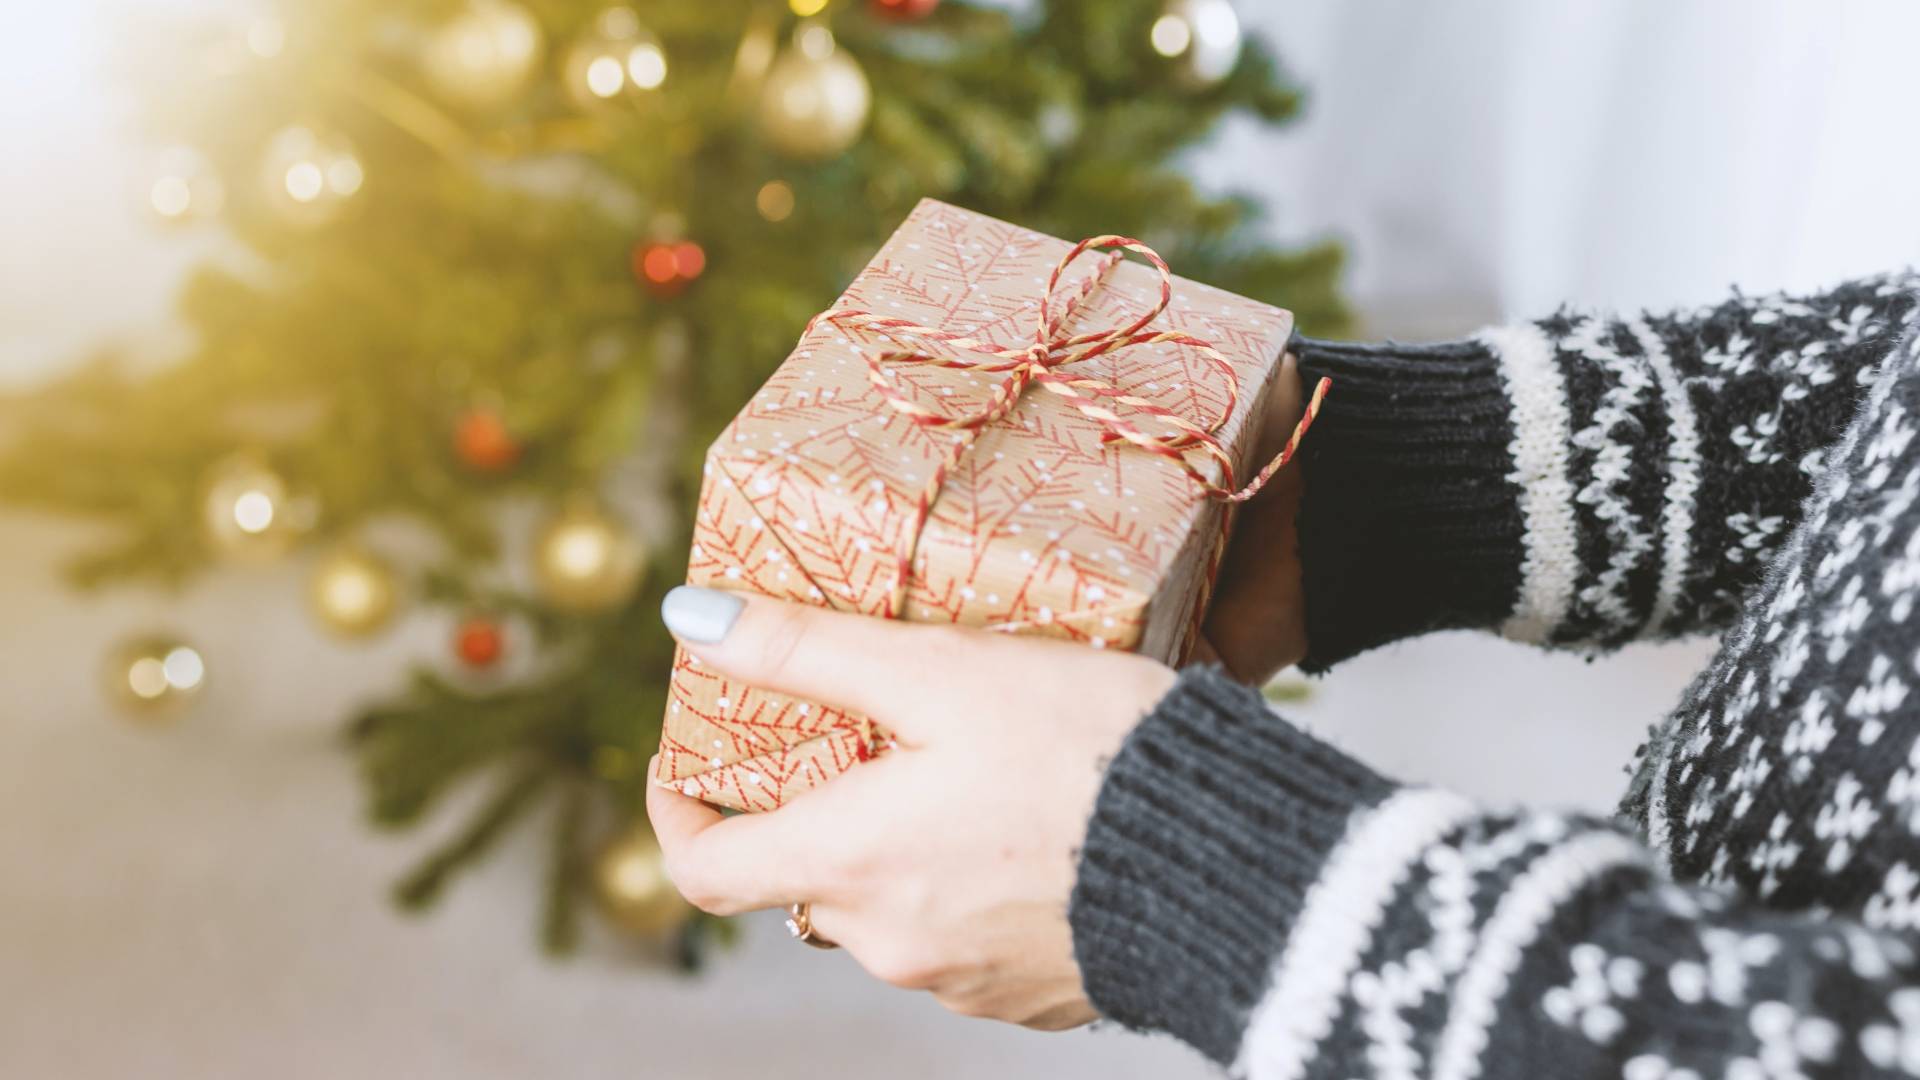 Meaningful Christmas gift ideas that will deepen your faith